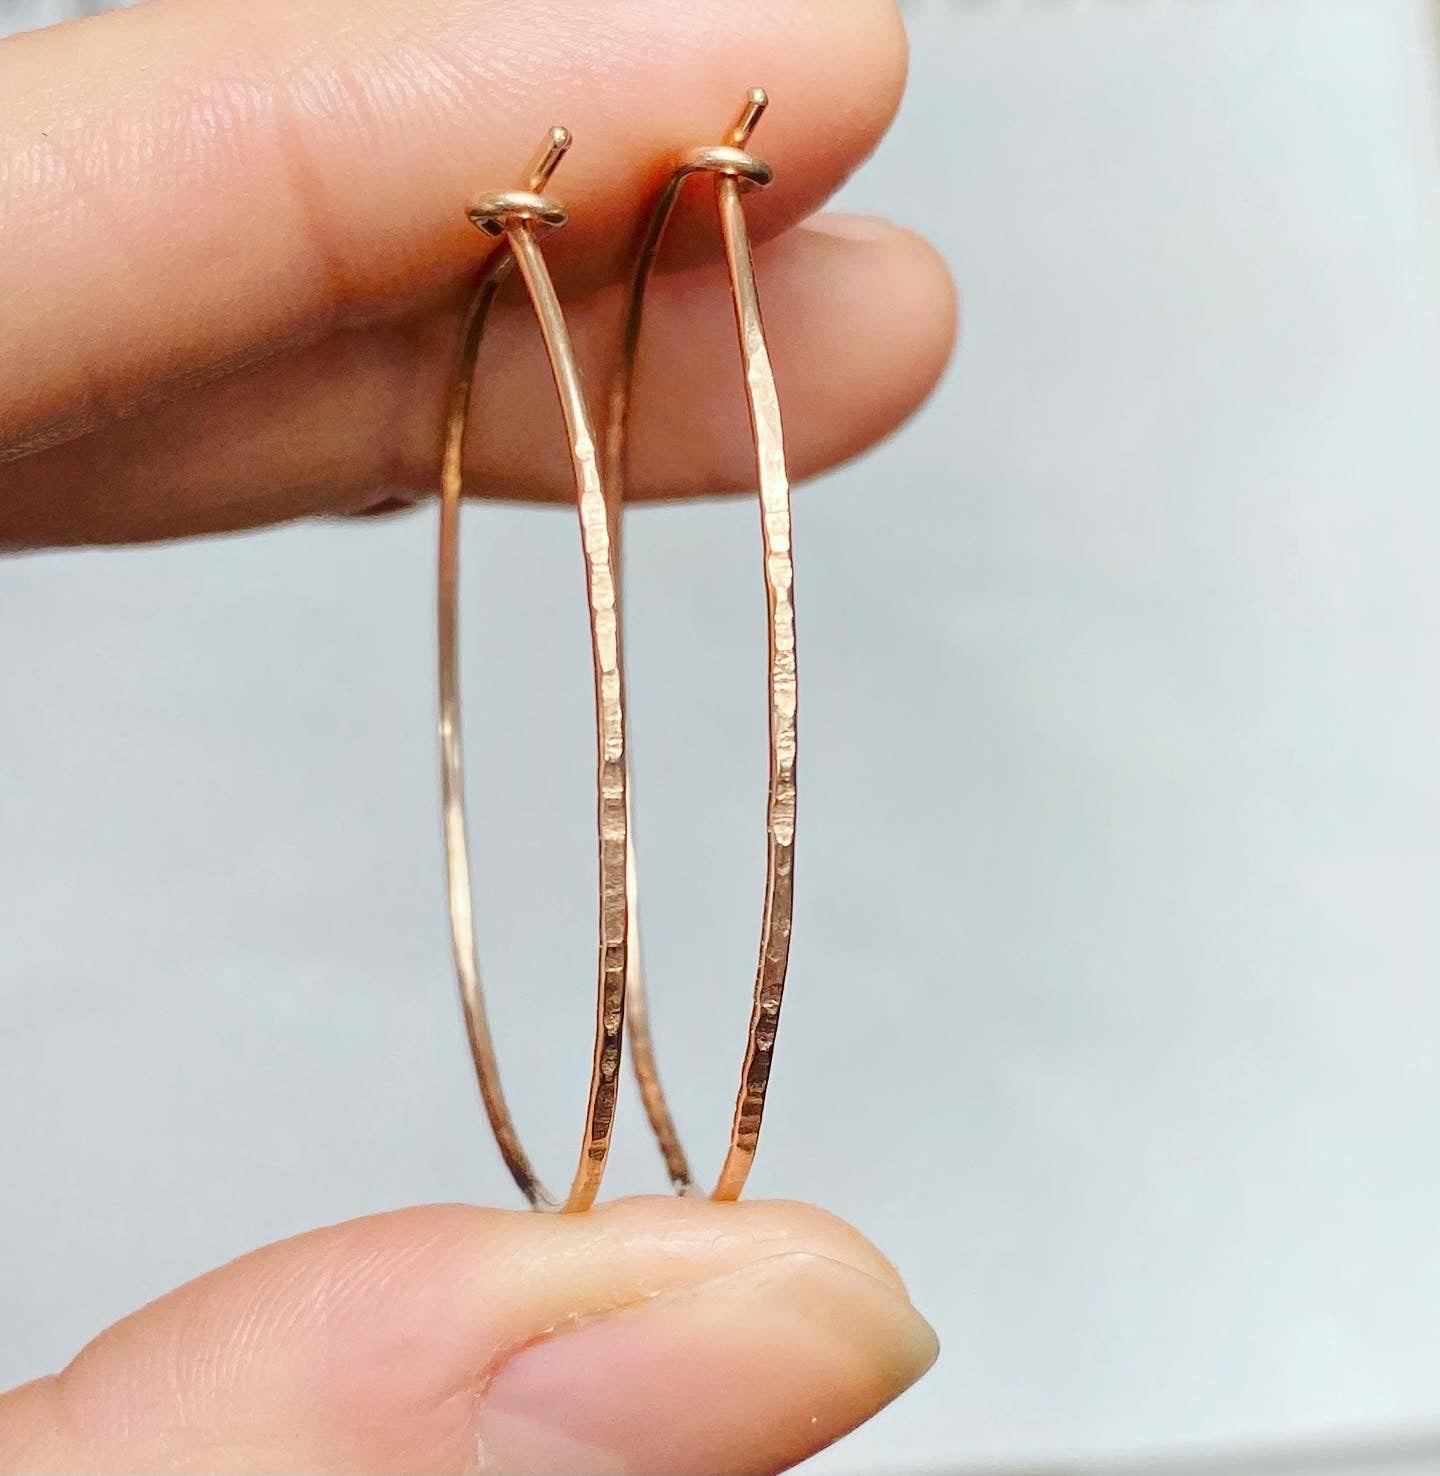 Medium Hoop Earrings in Sterling Silver or Gold Fill *Live your life Collection